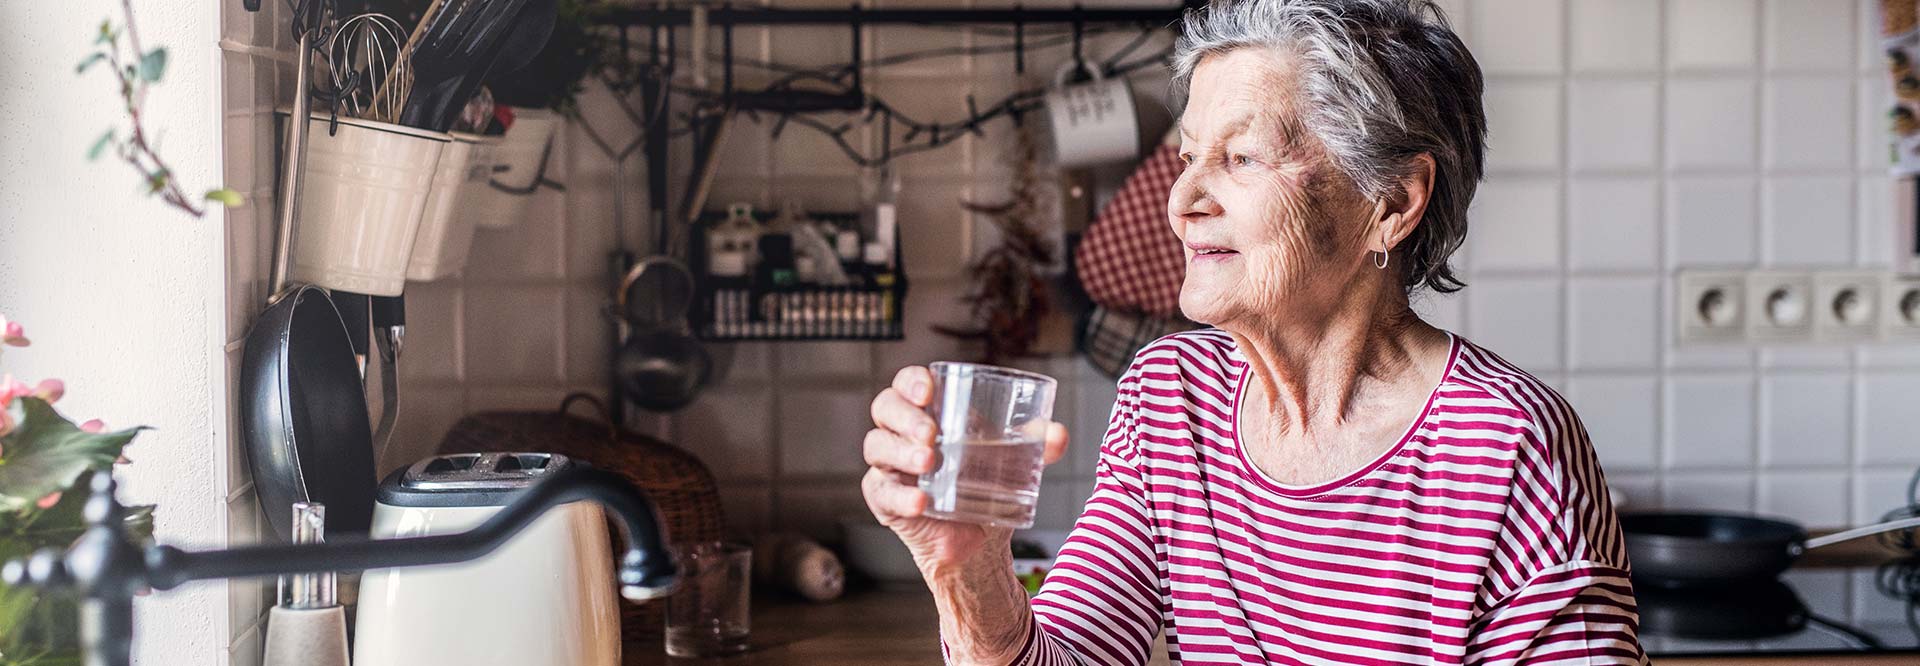 Can my elderly parent live alone?